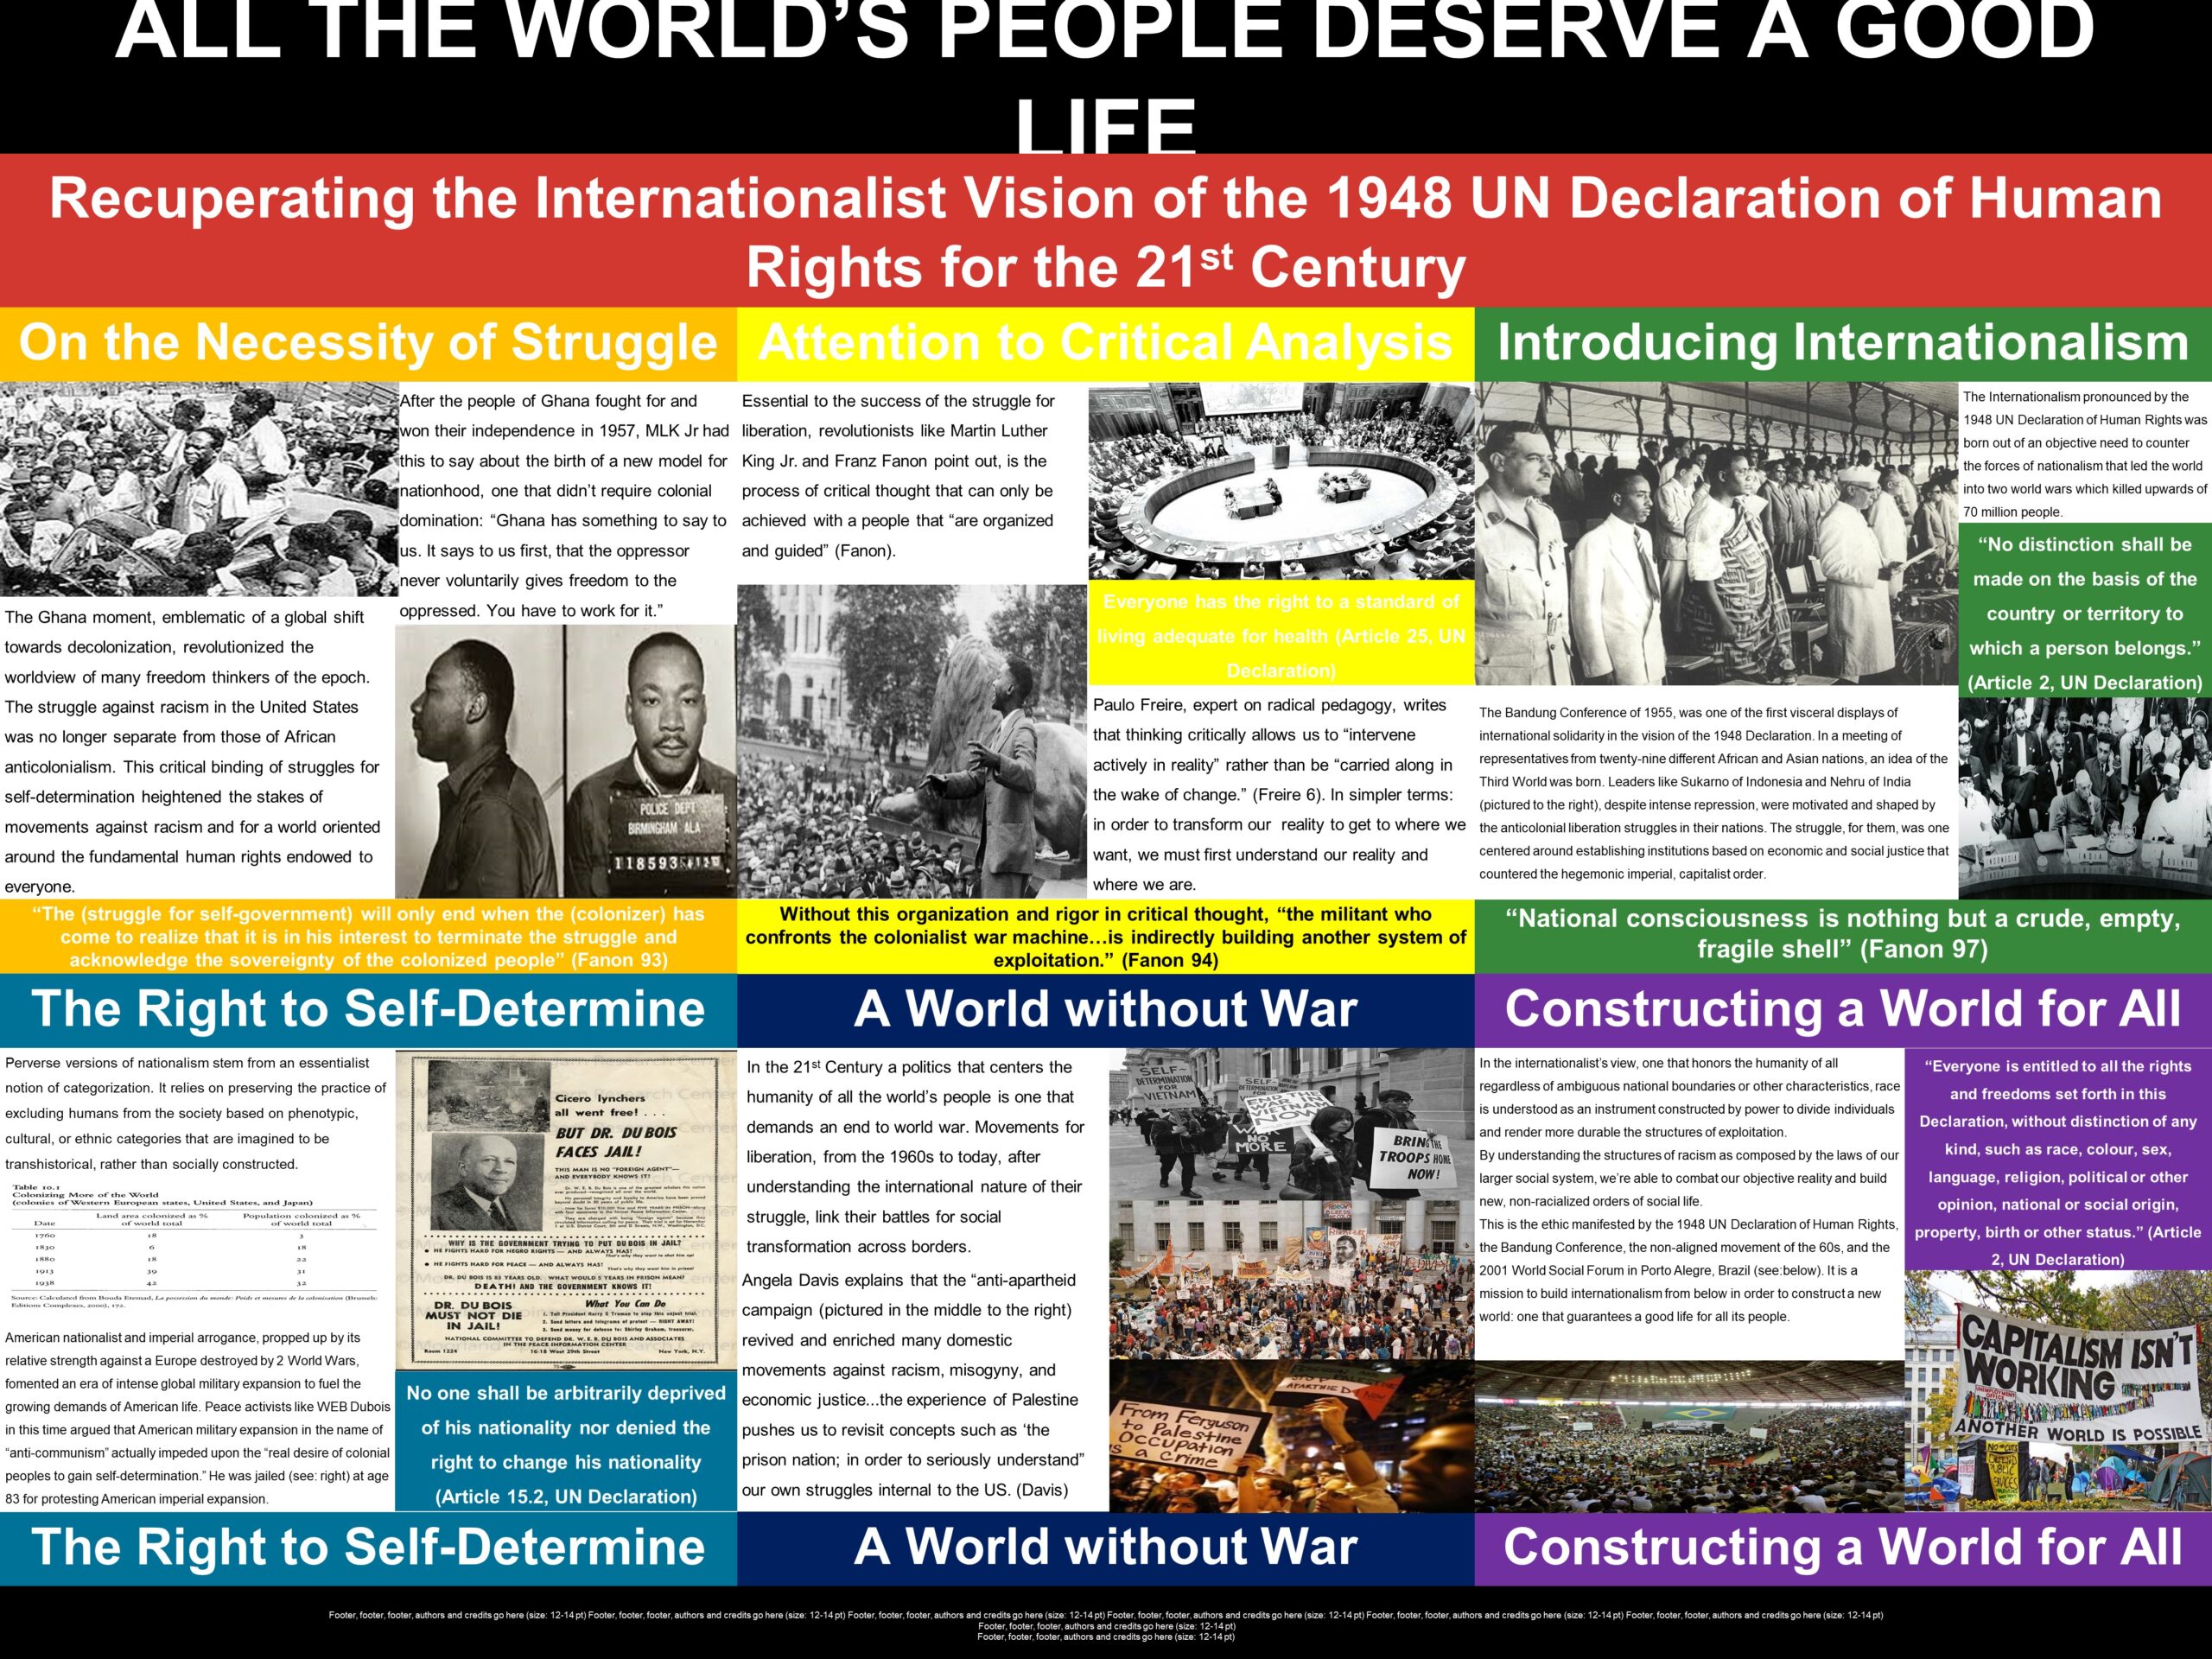 5.6 All the World’s People Deserve a Good Life: Recuperating the Internationalist Vision of the 1948 UN Declaration of Human Rights for the 21st Century